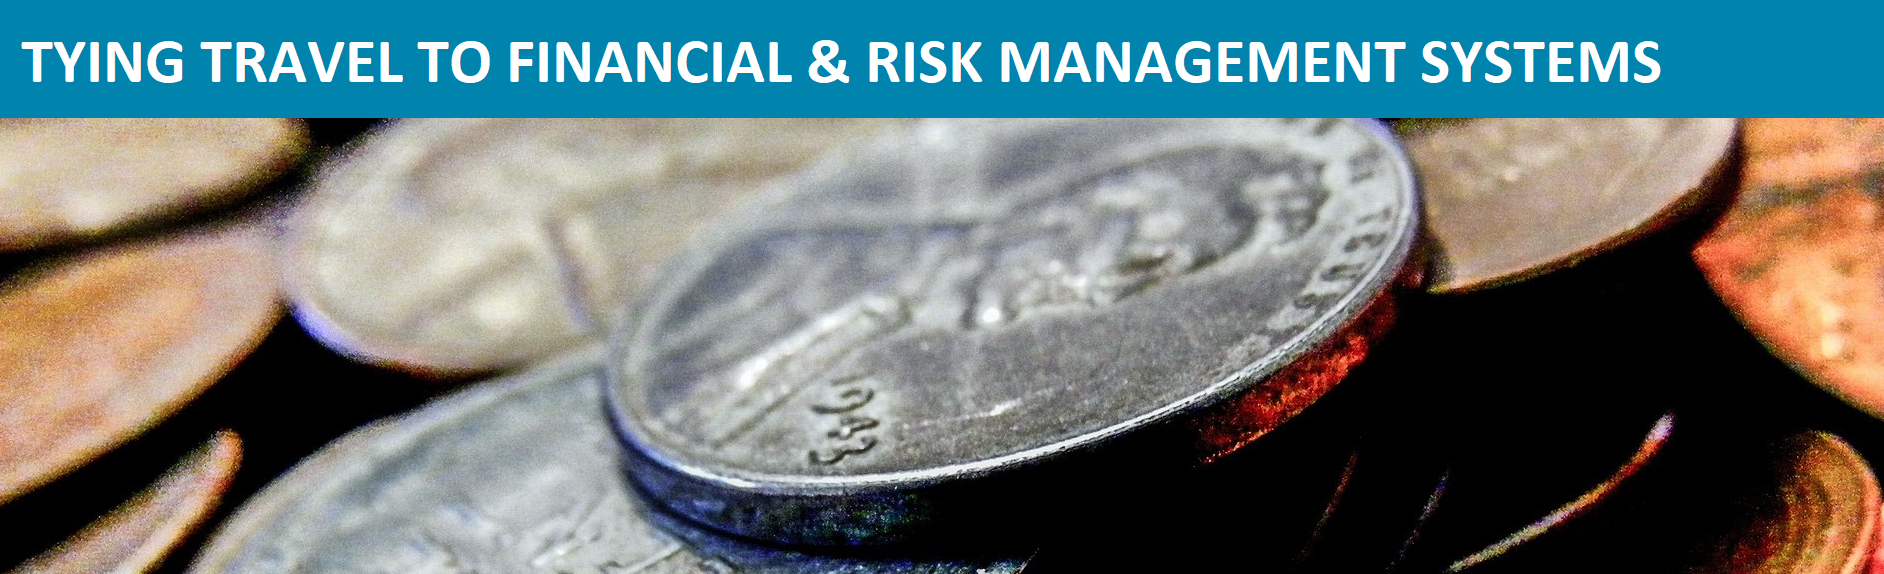 TYING TRAVEL TO FINANCIAL & RISK MANAGEMENT SYSTEMS